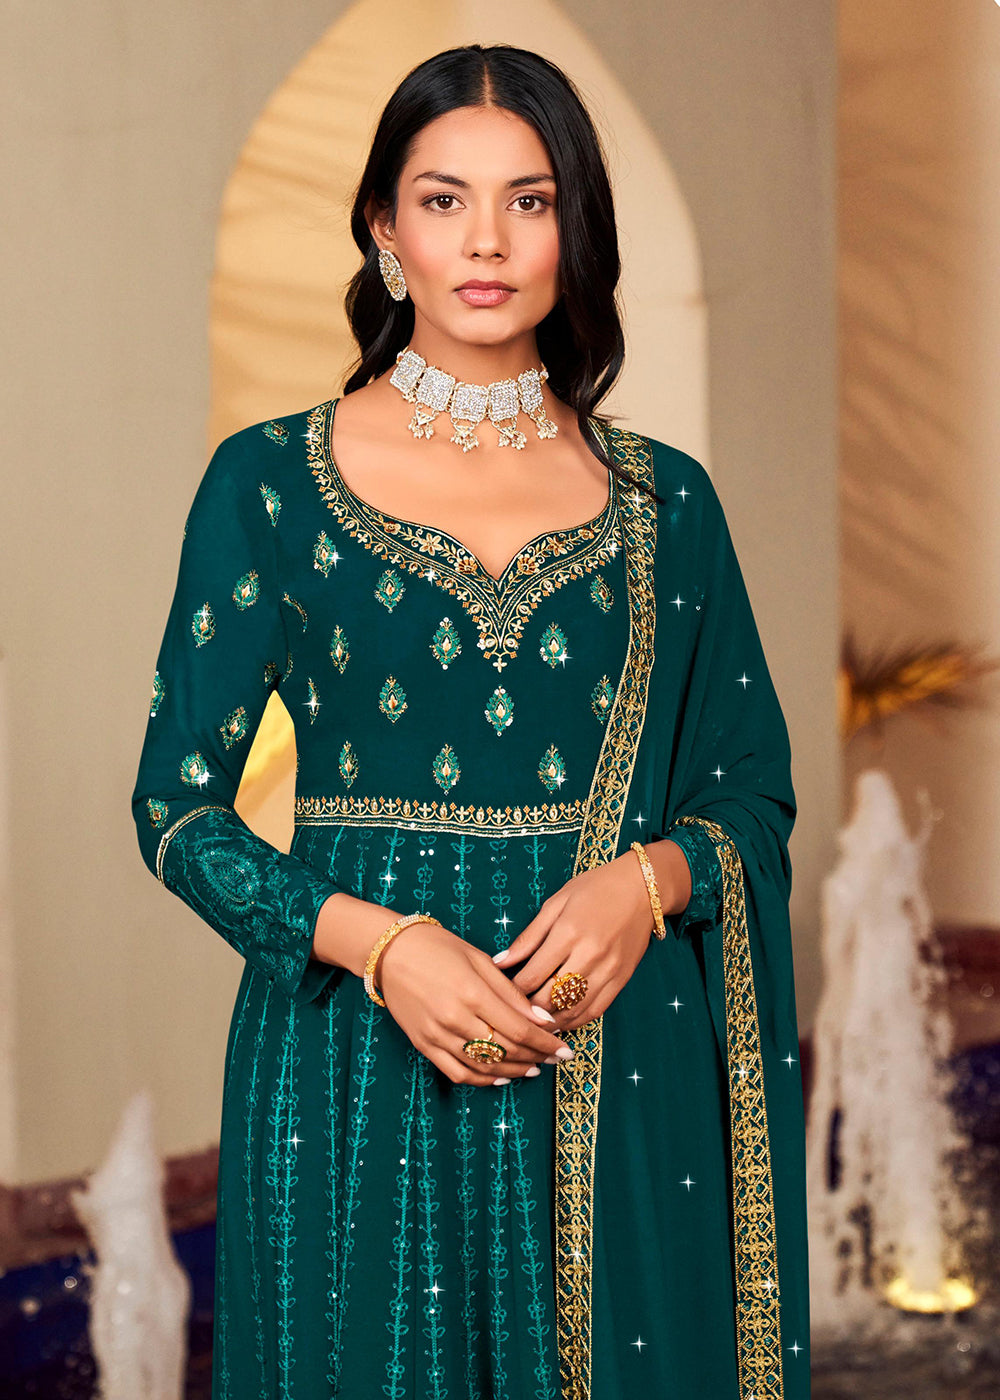 Buy Now Floor Length Classic Teal Wedding Wear Anarkali Suit Online in USA, UK, Australia, New Zealand, Canada, Italy & Worldwide at Empress Clothing.